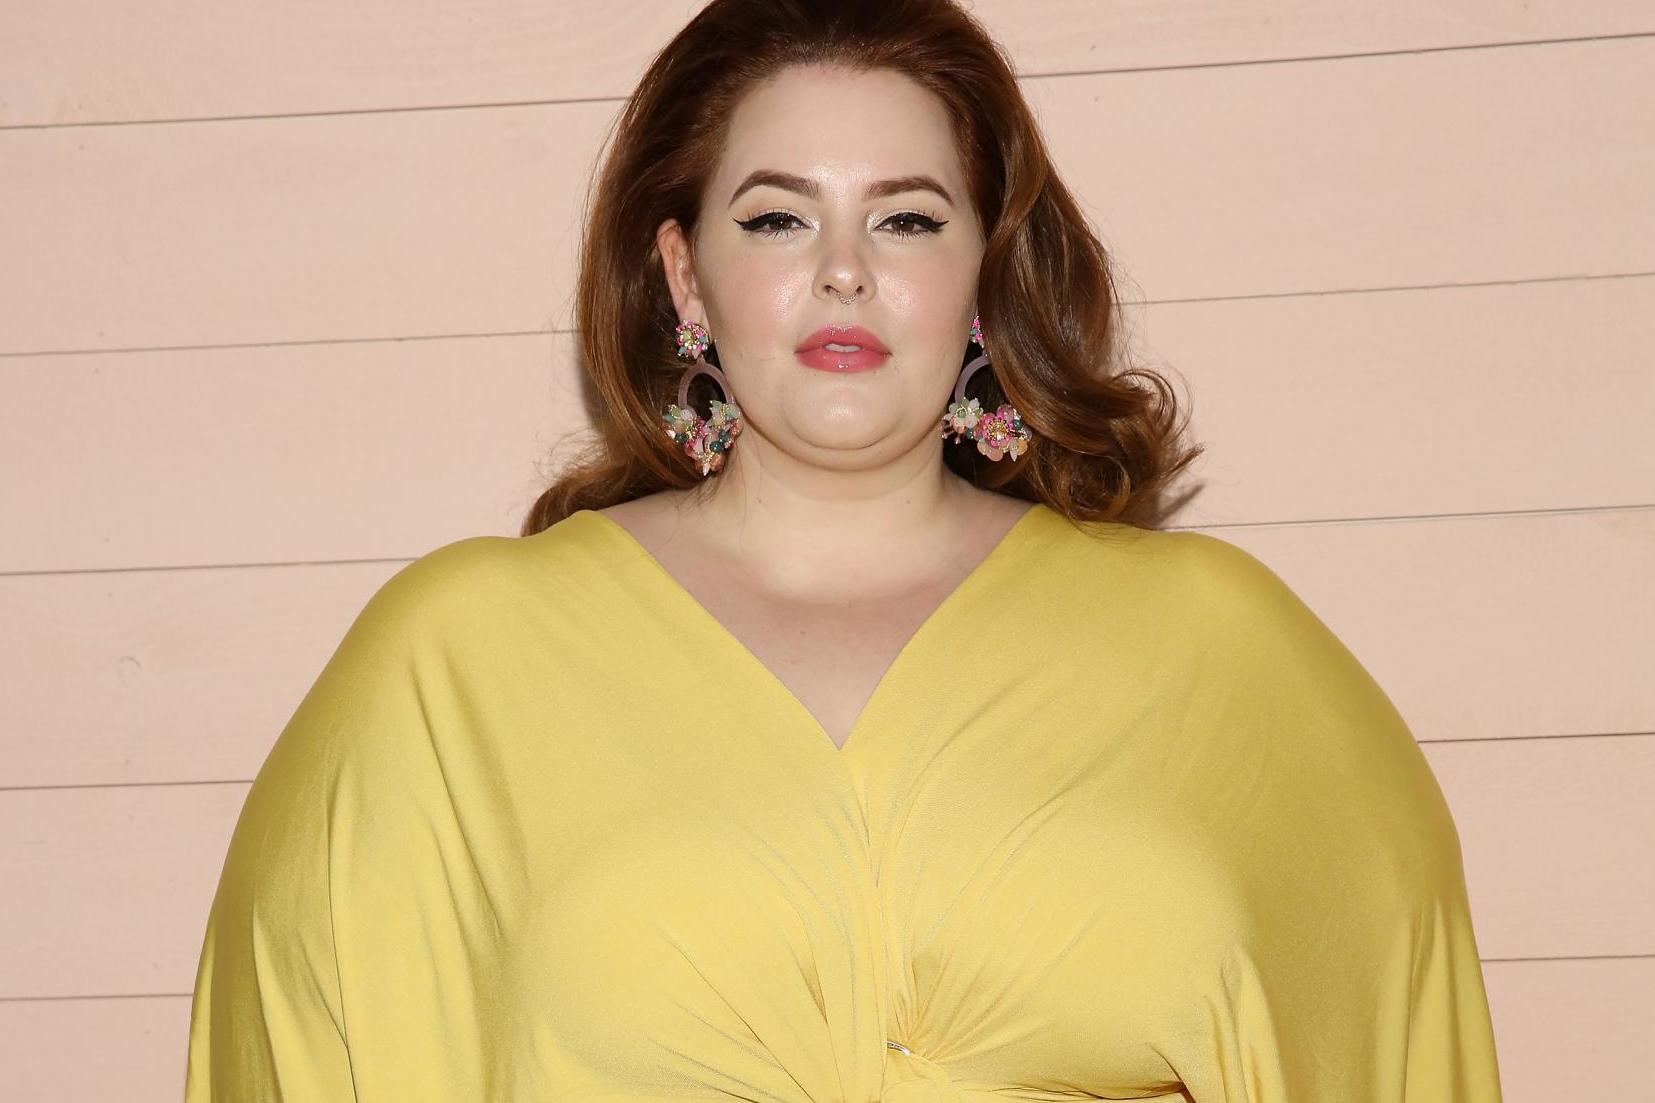 Tess Holliday’s Cosmopolitan cover has sparked an important debate (Getty)